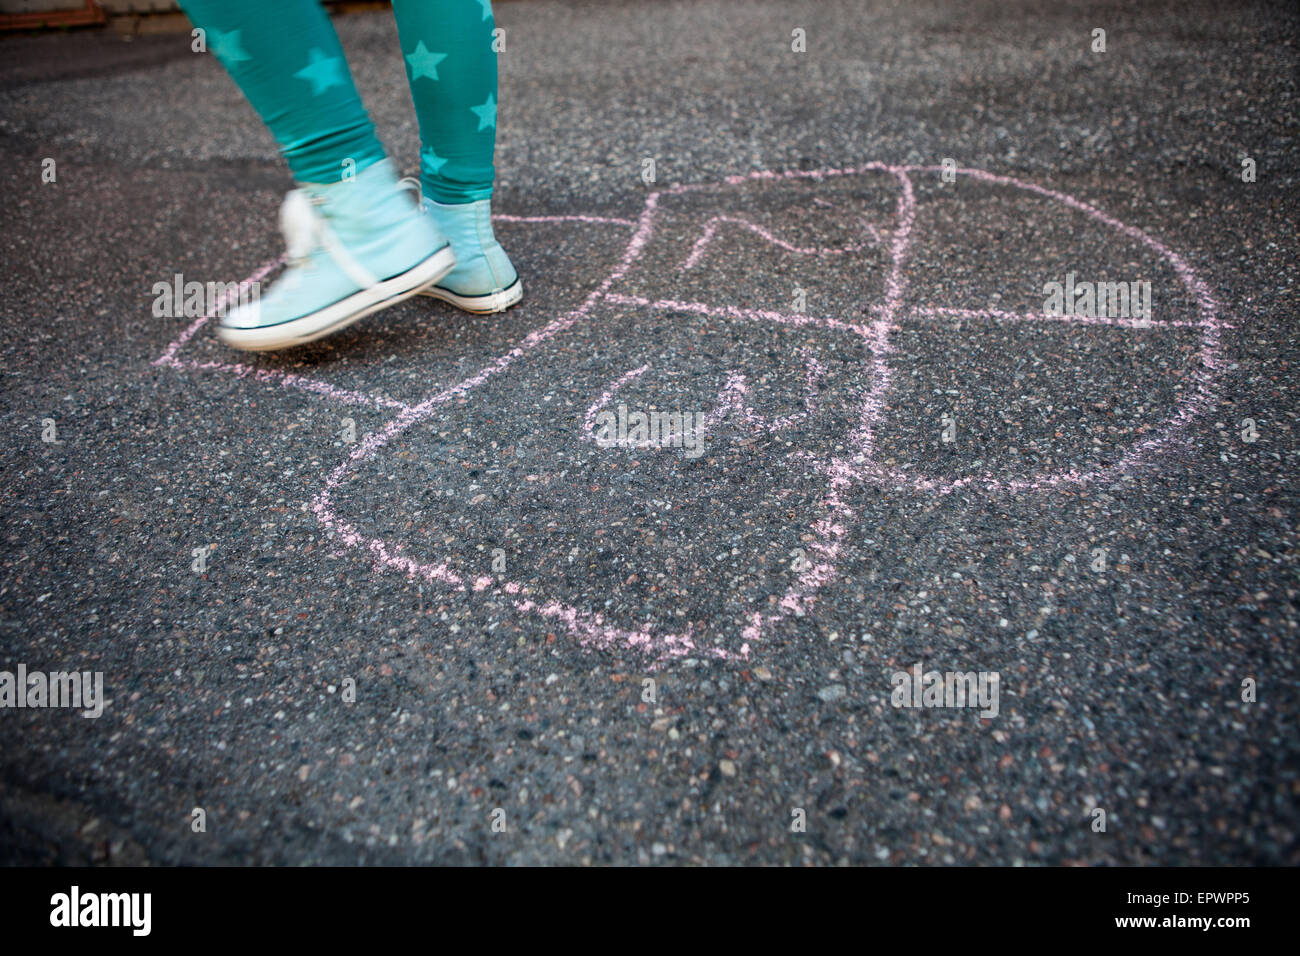 Girl hopping on hopscotch drawn to asphalt with street chalk outdoors Stock Photo